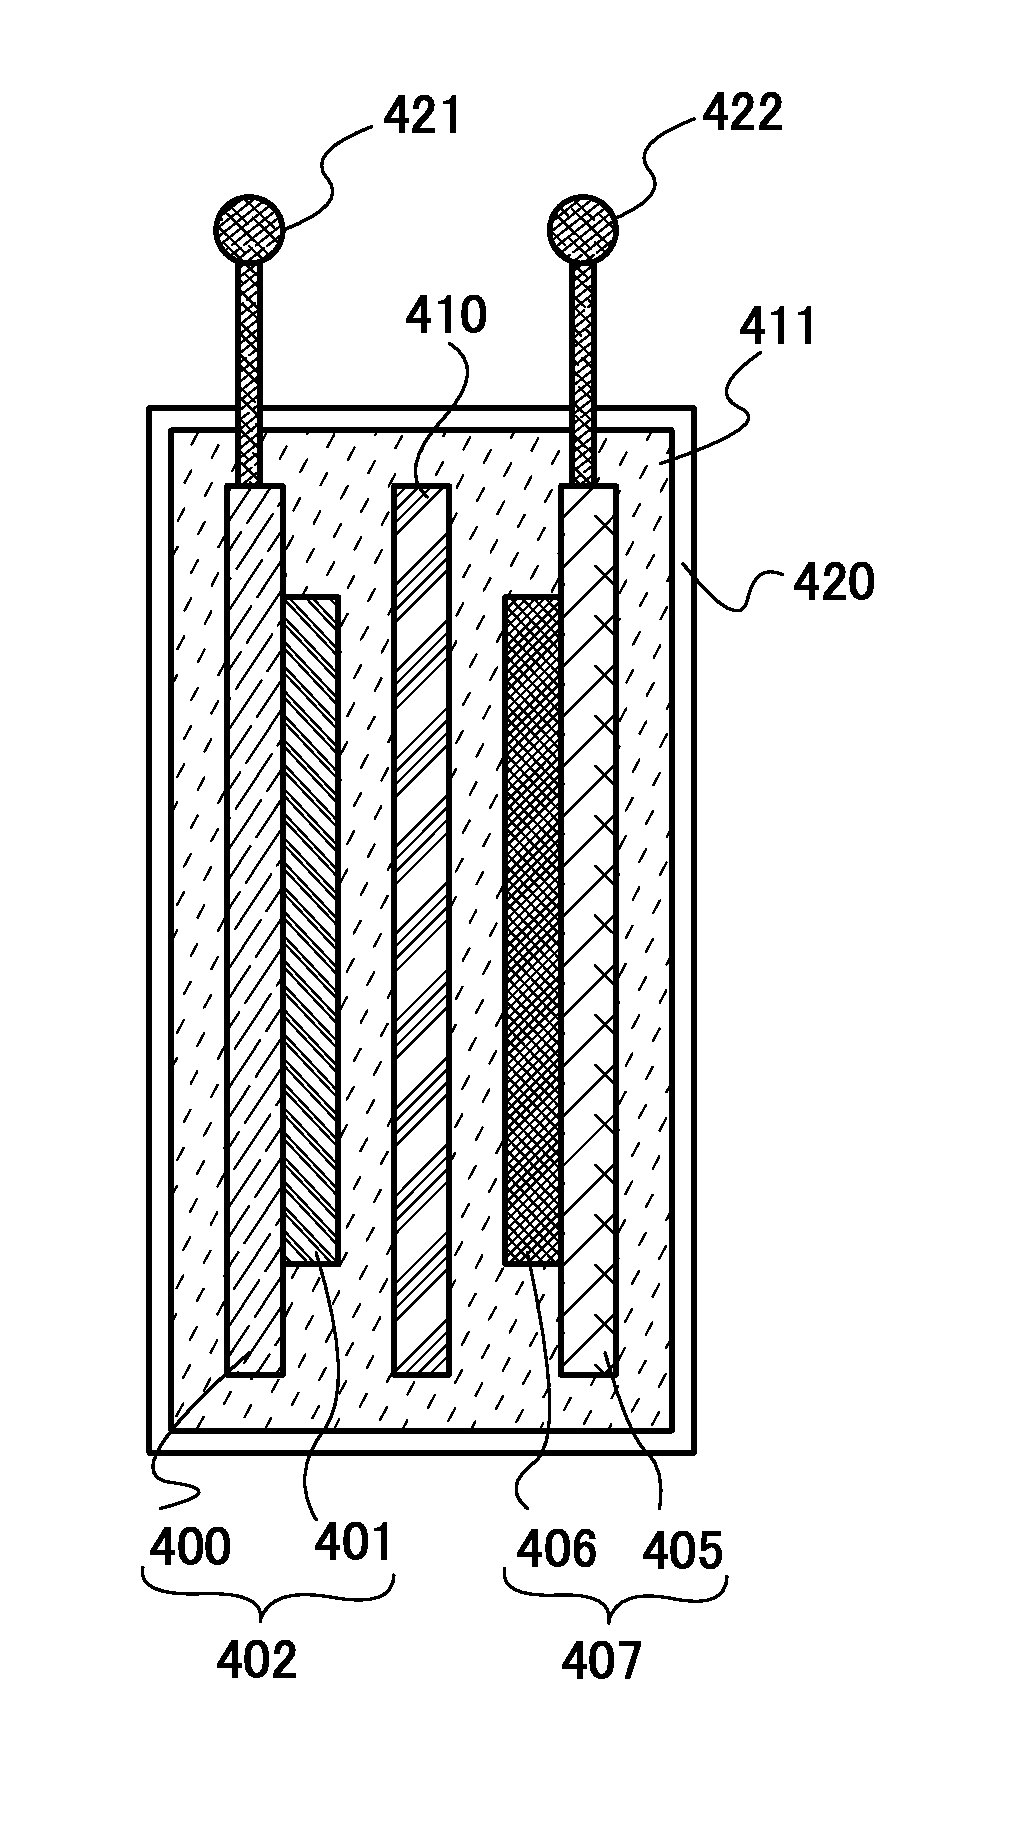 Method of manufacturing positive electrode active material for lithium ion battery